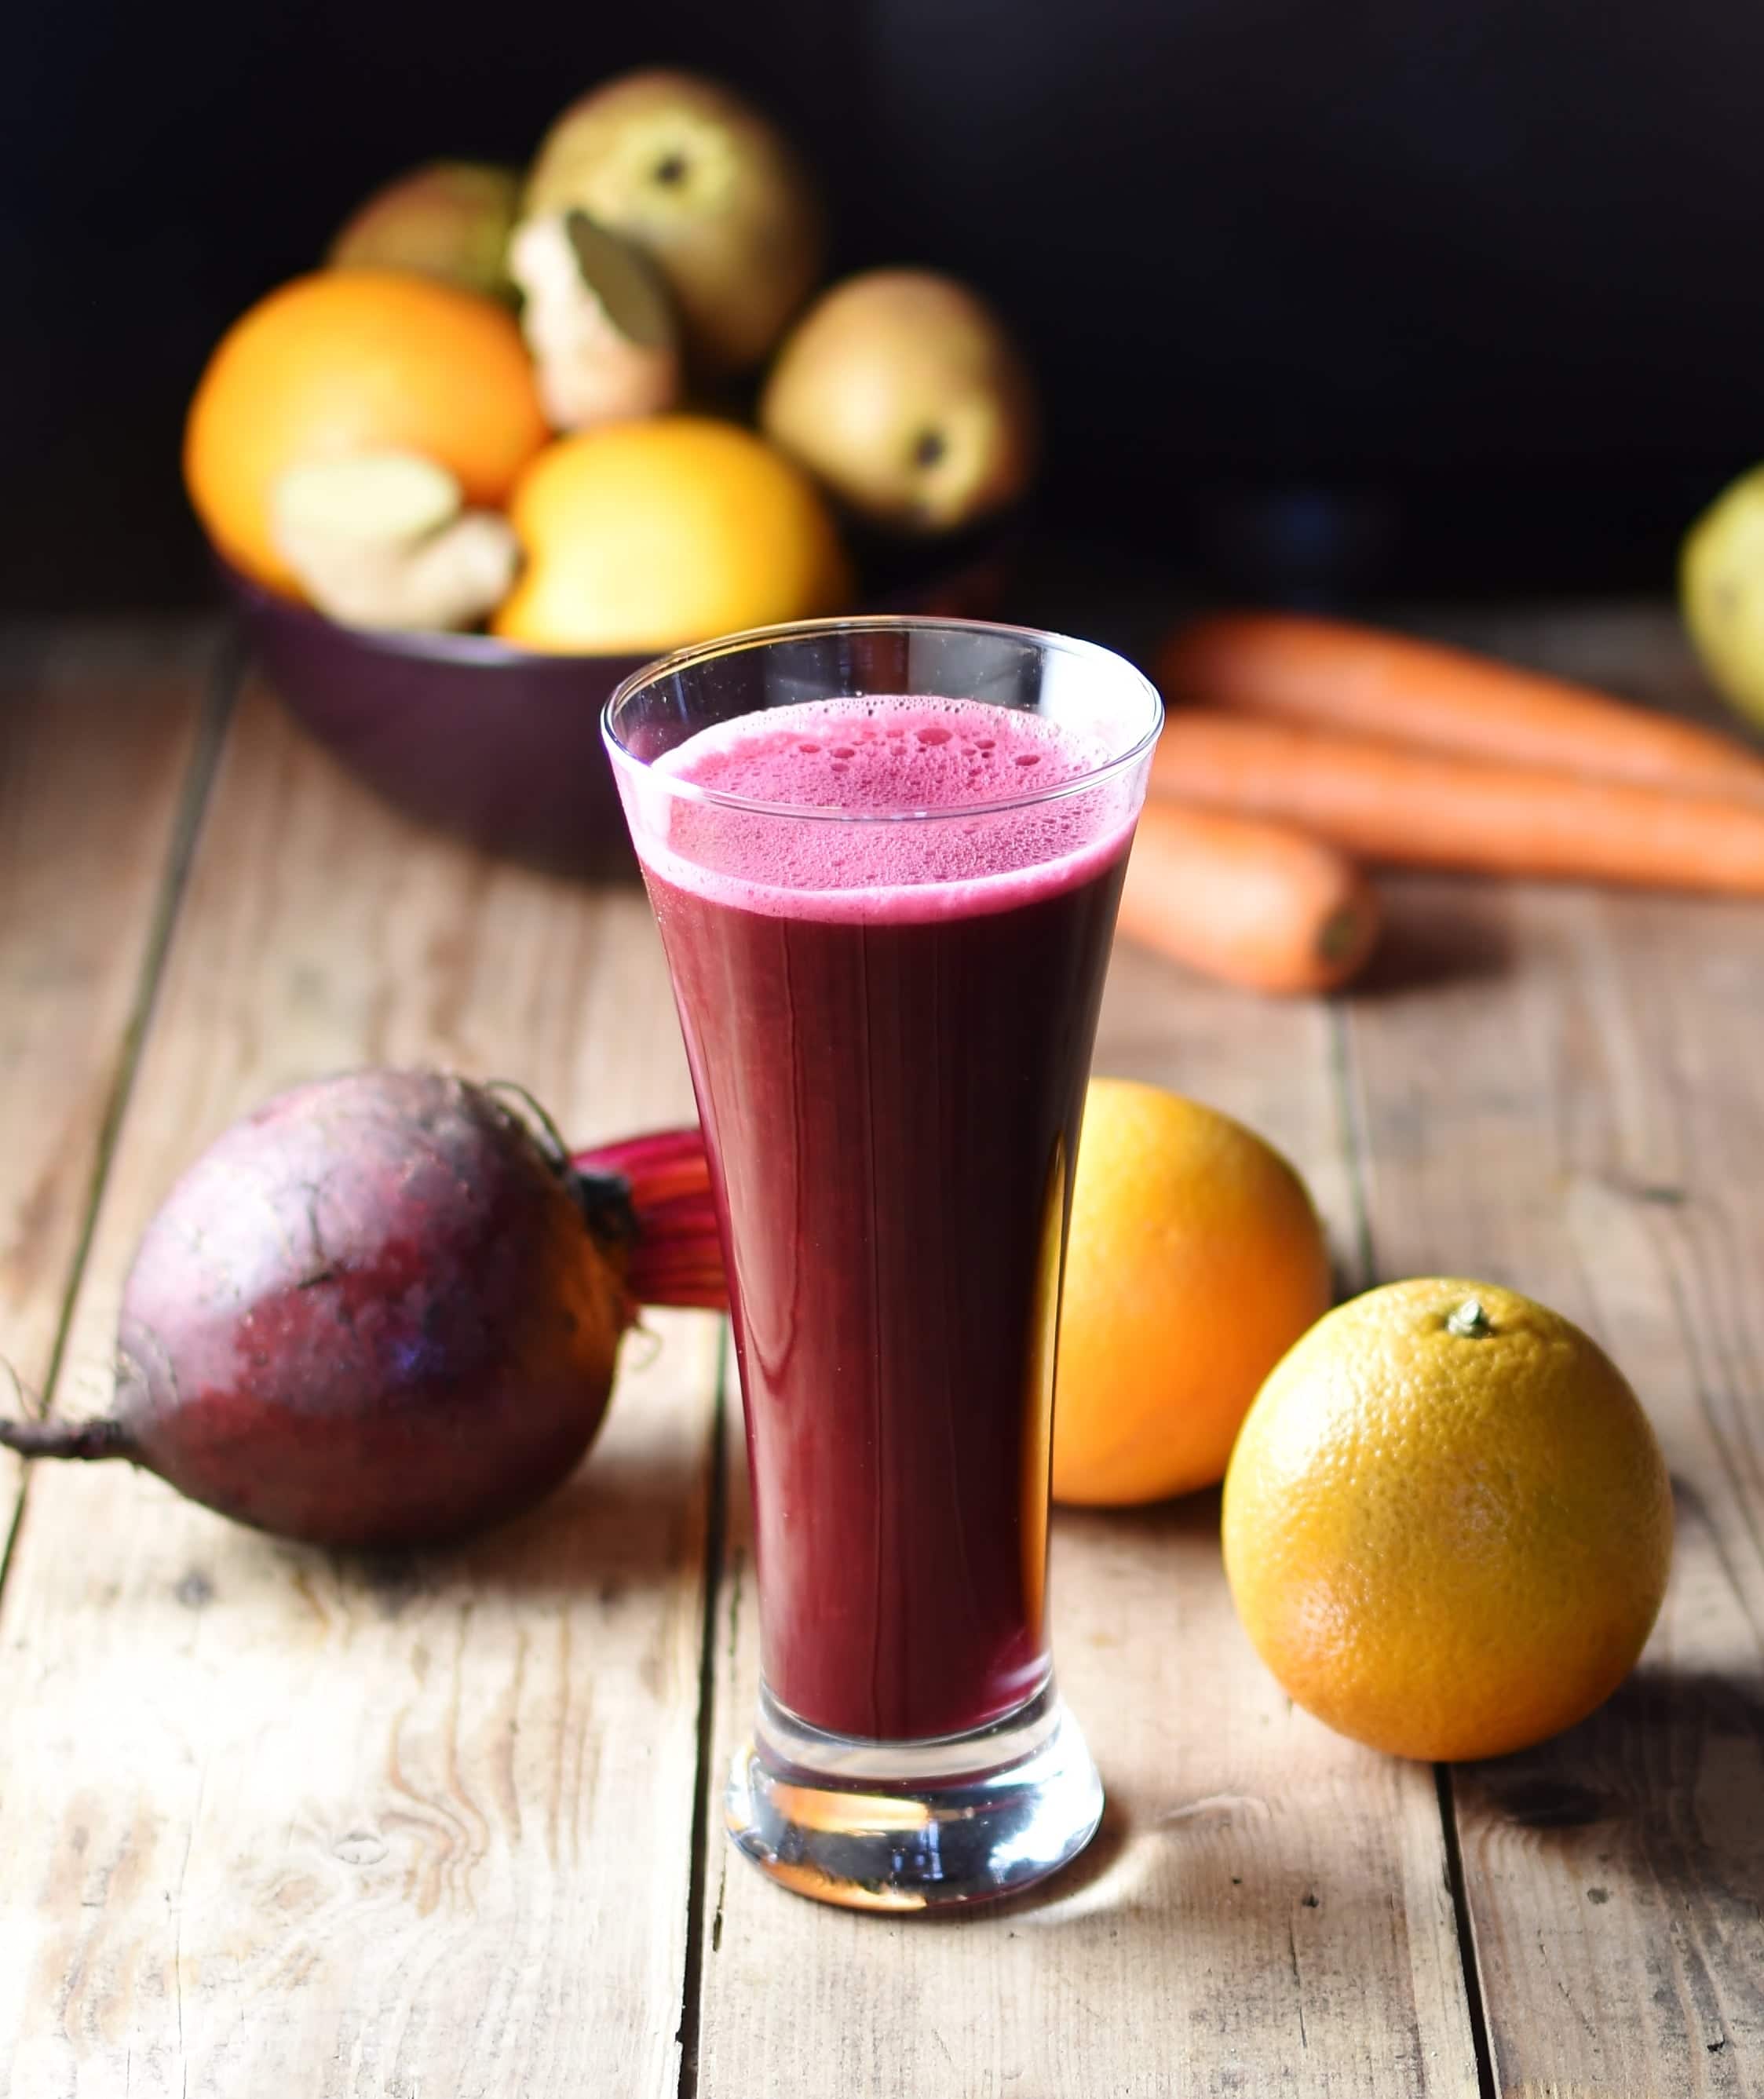 Side view of red cabbage juice in tall glass with 2 oranges, beet and other fruits and vegetables in background.